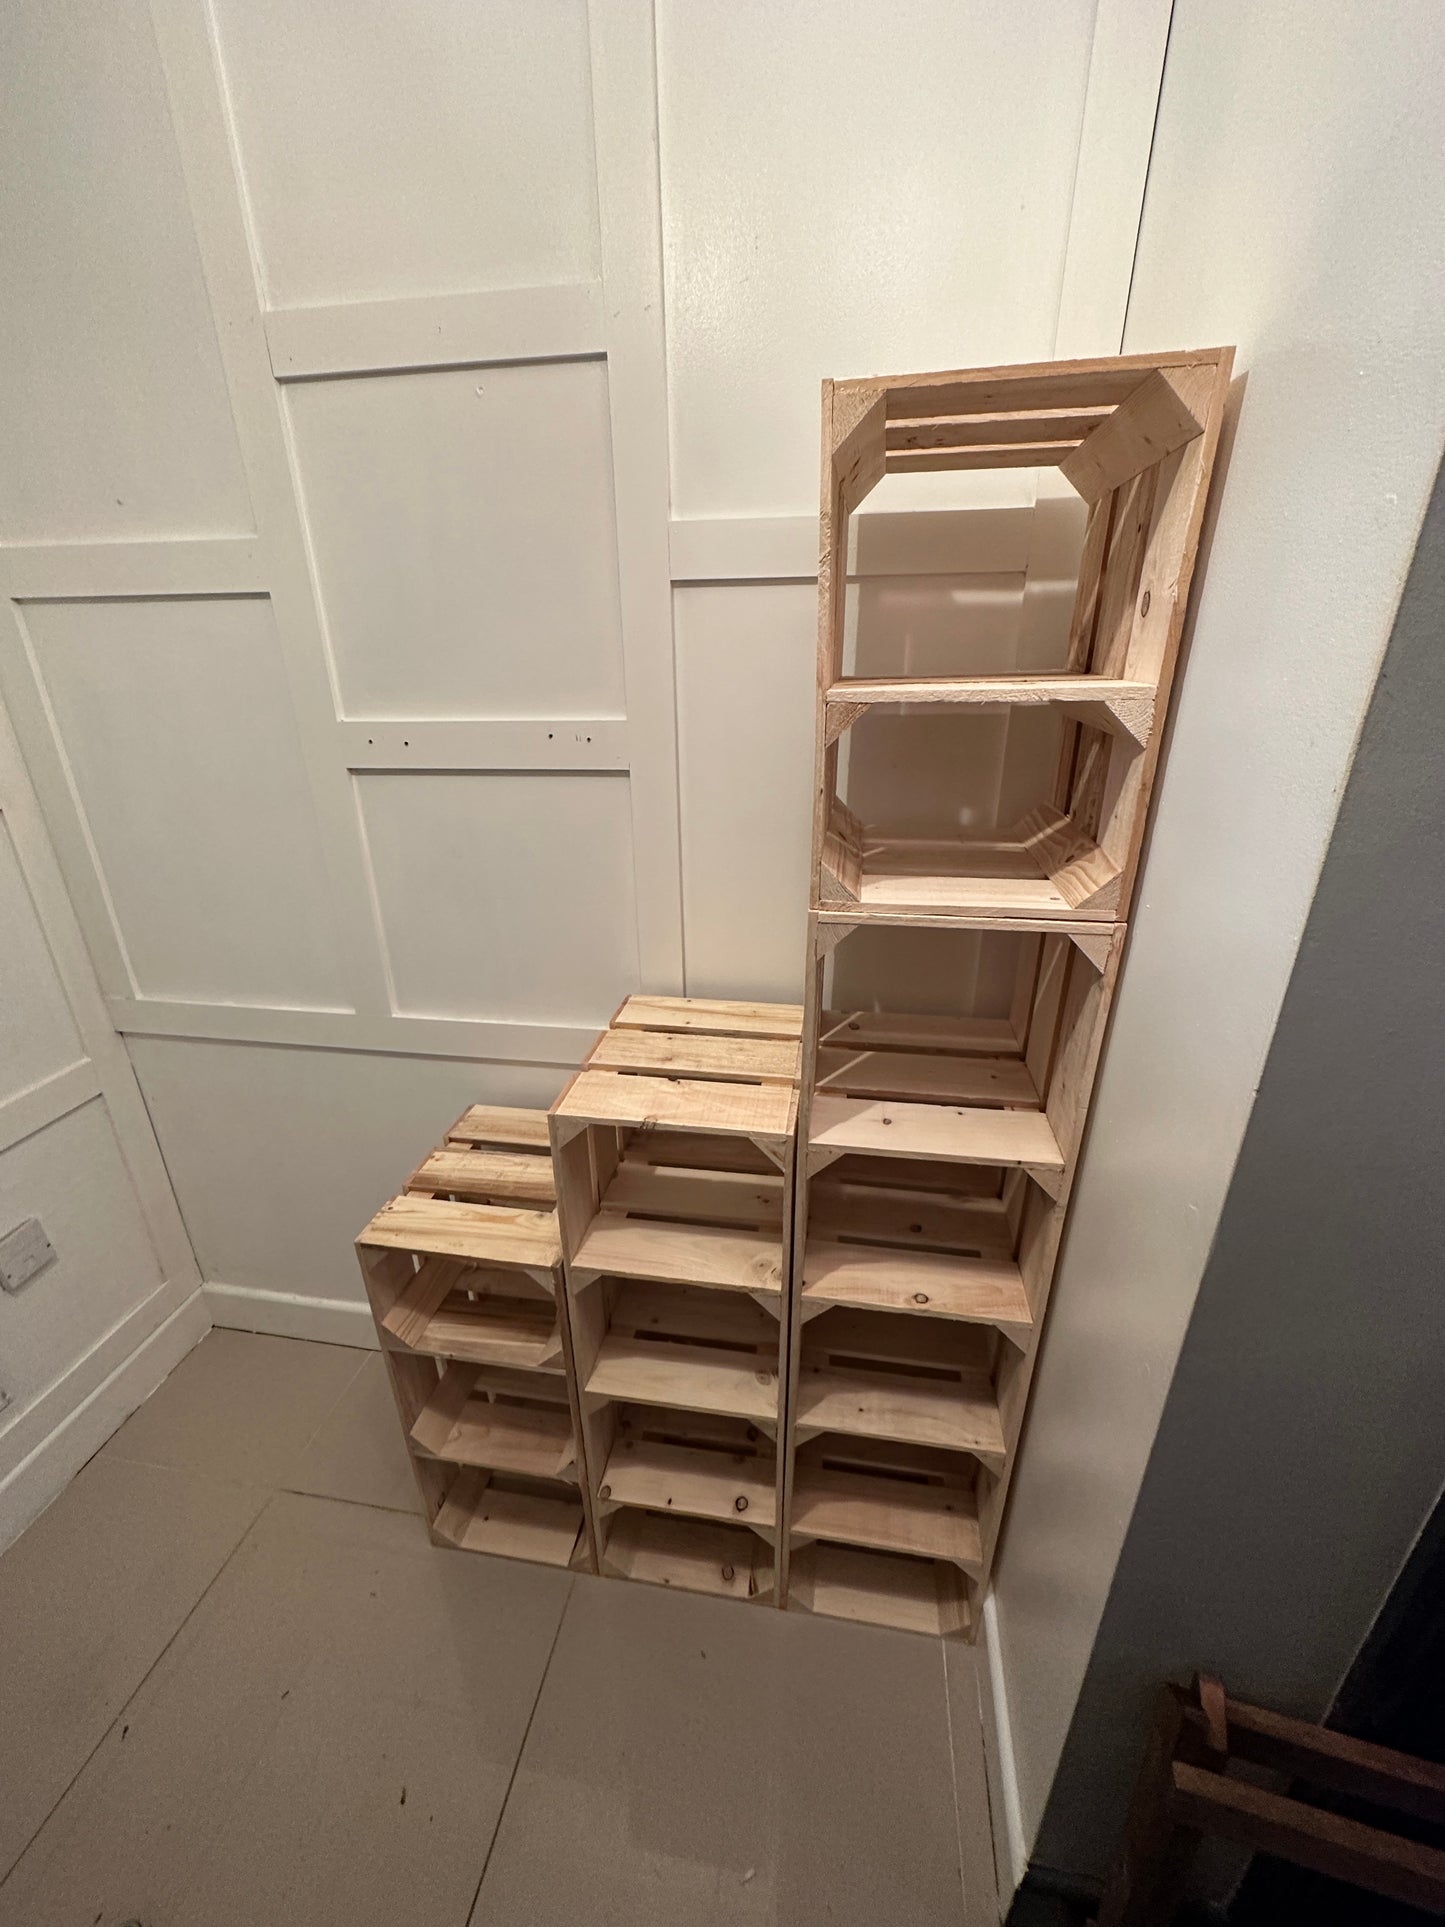 Tall SHOE RACK - Build your own, Various sizes, wooden rustic Orange crate shoe rack, narrow and tall shoe storage - Very deep